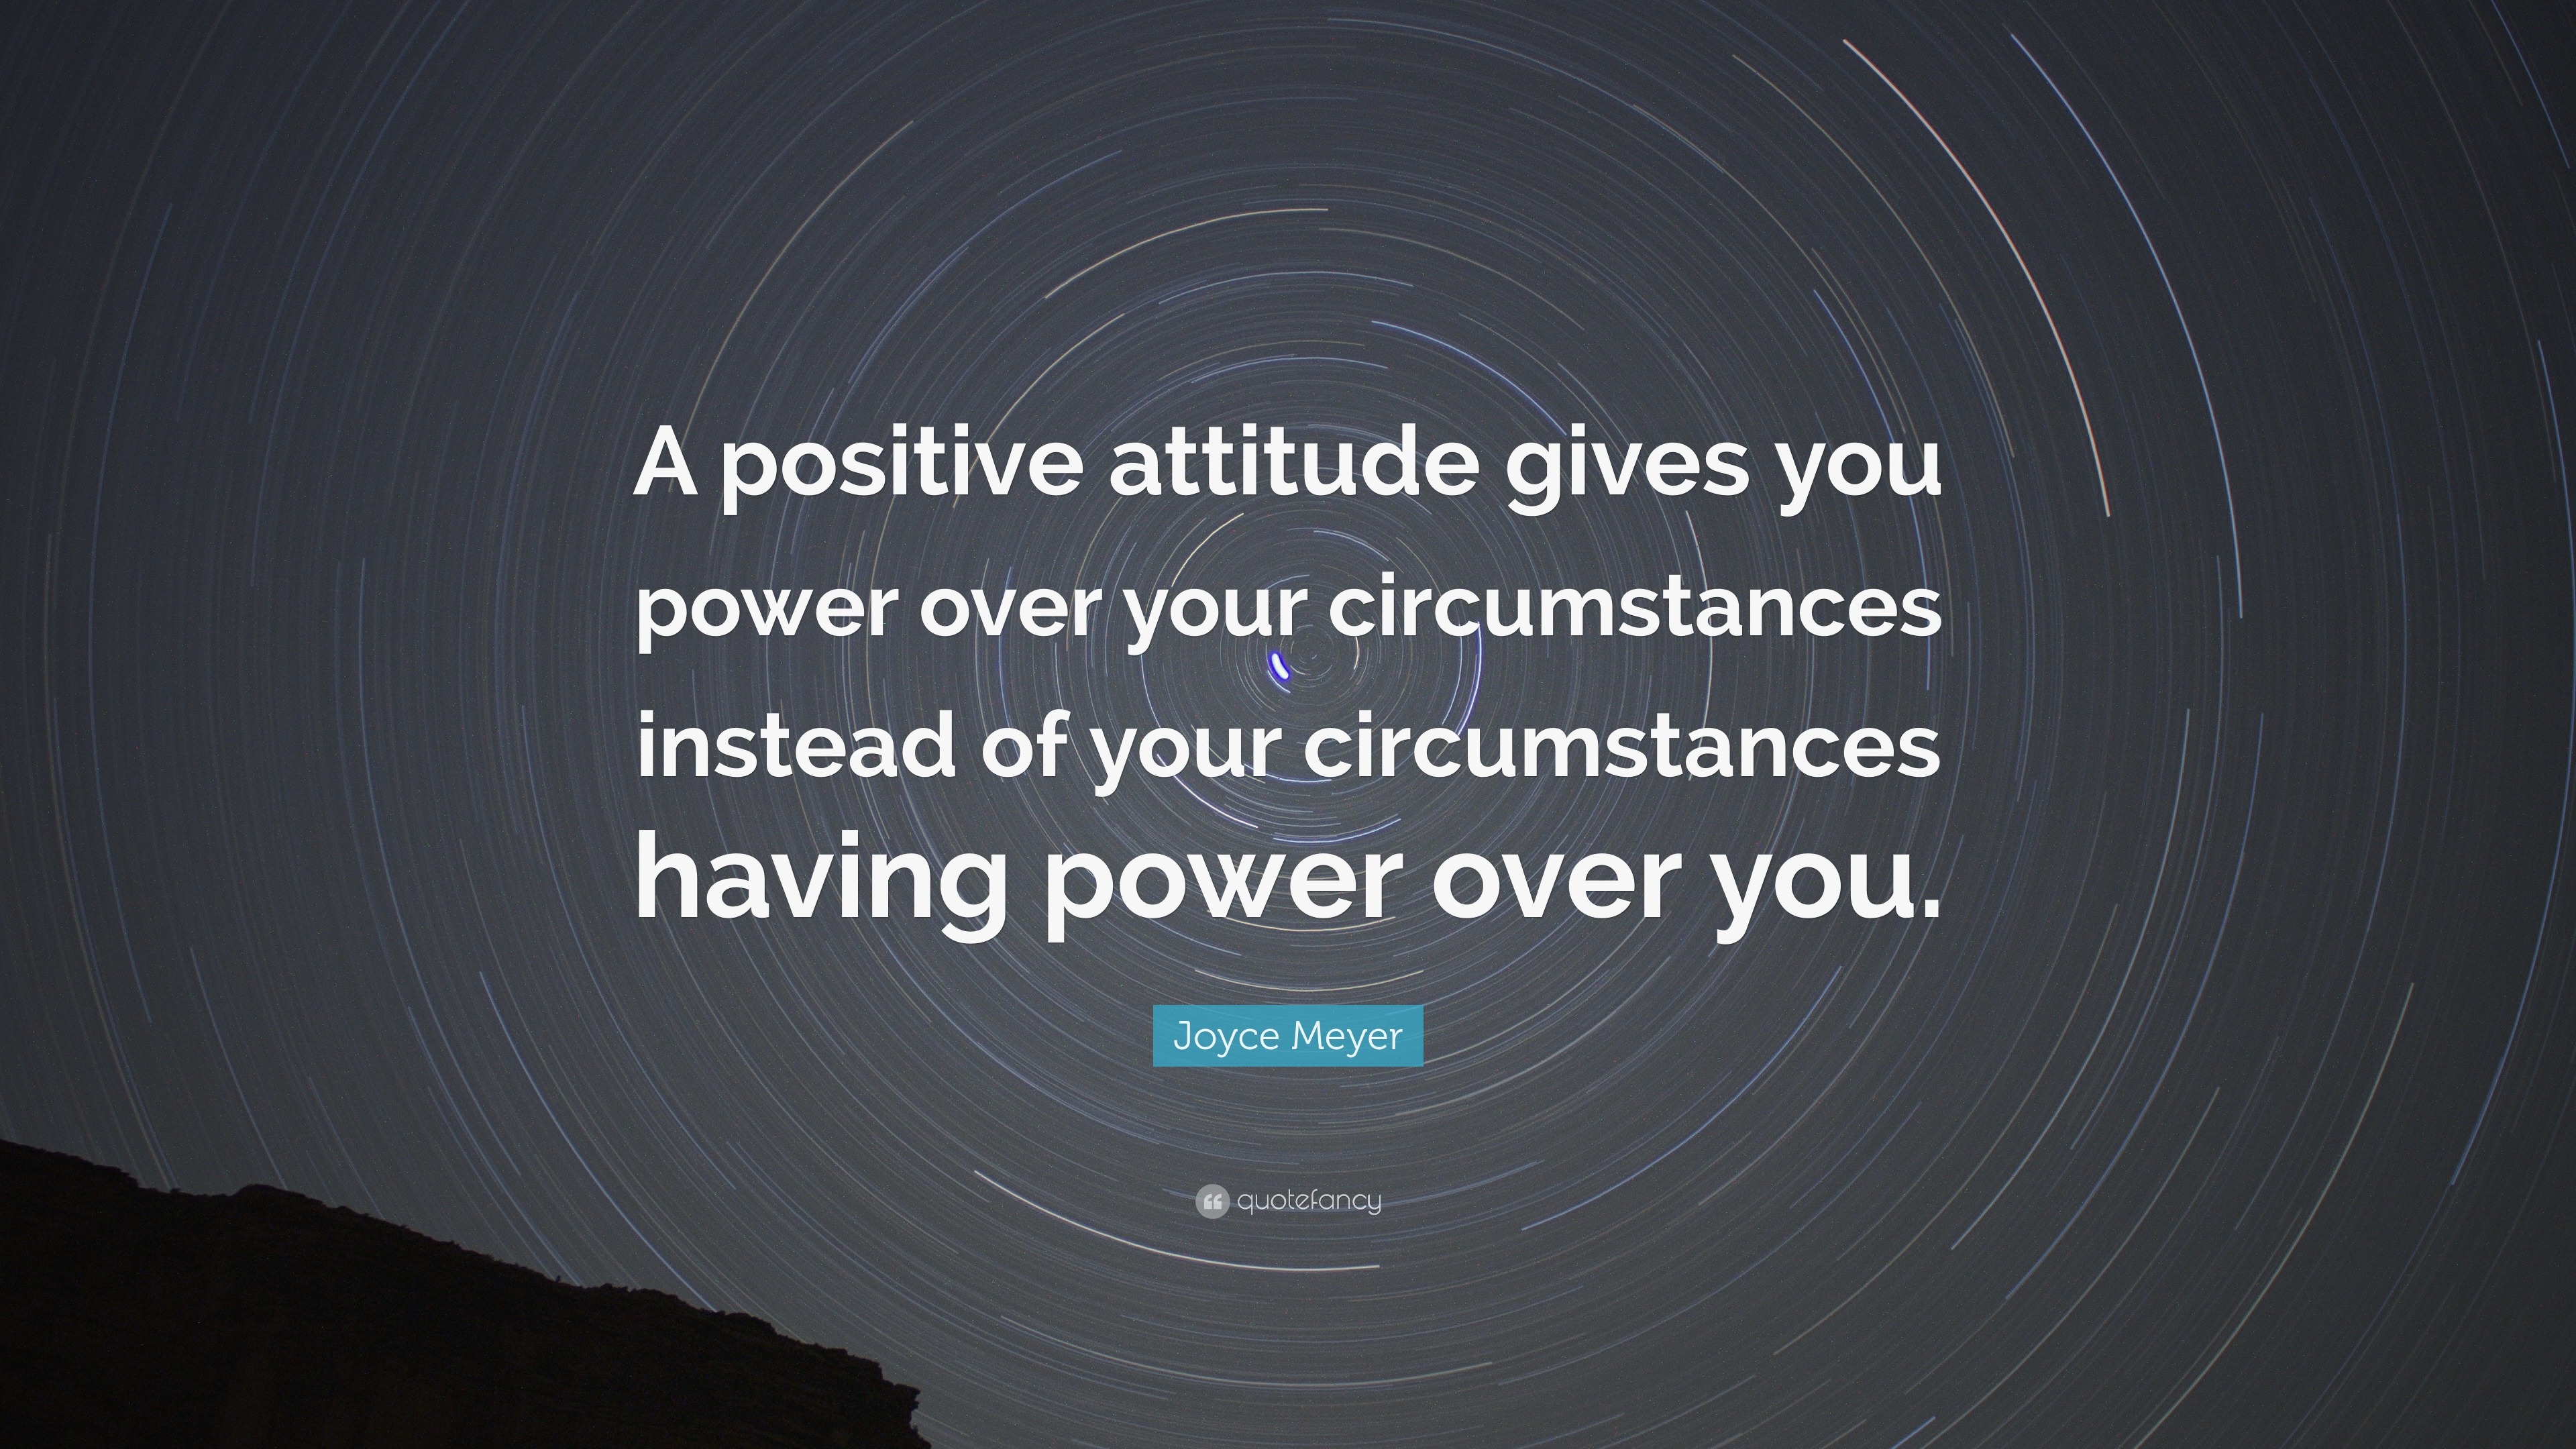 Joyce Meyer Quote: “A positive attitude gives you power over your